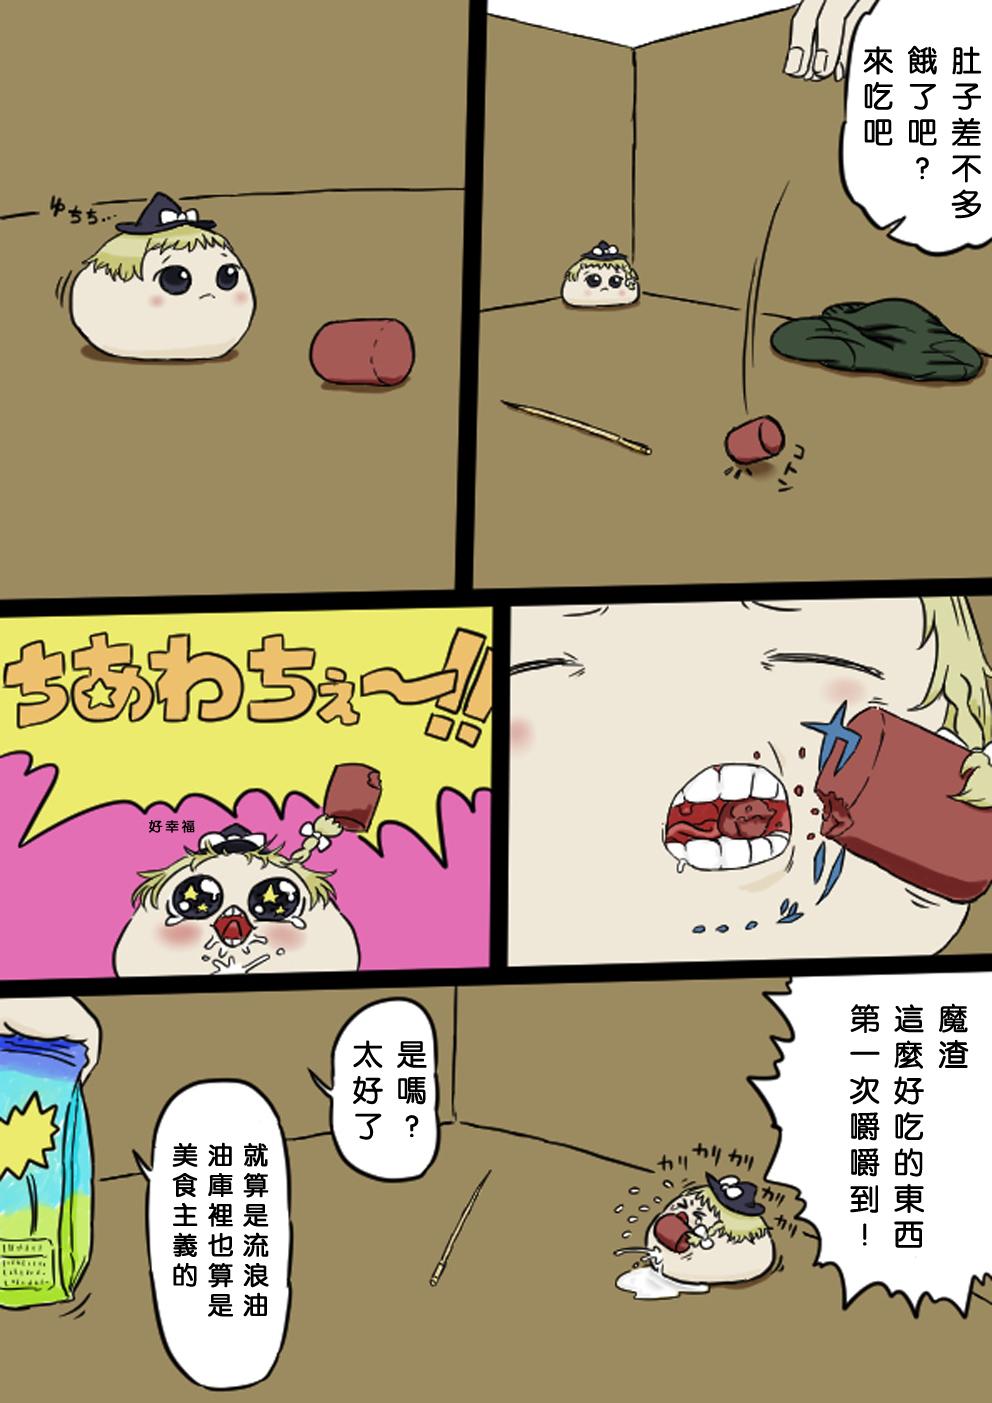 Moan すべてをてにいれたまりちゃ（Chinese） - Touhou project Casal - Page 7